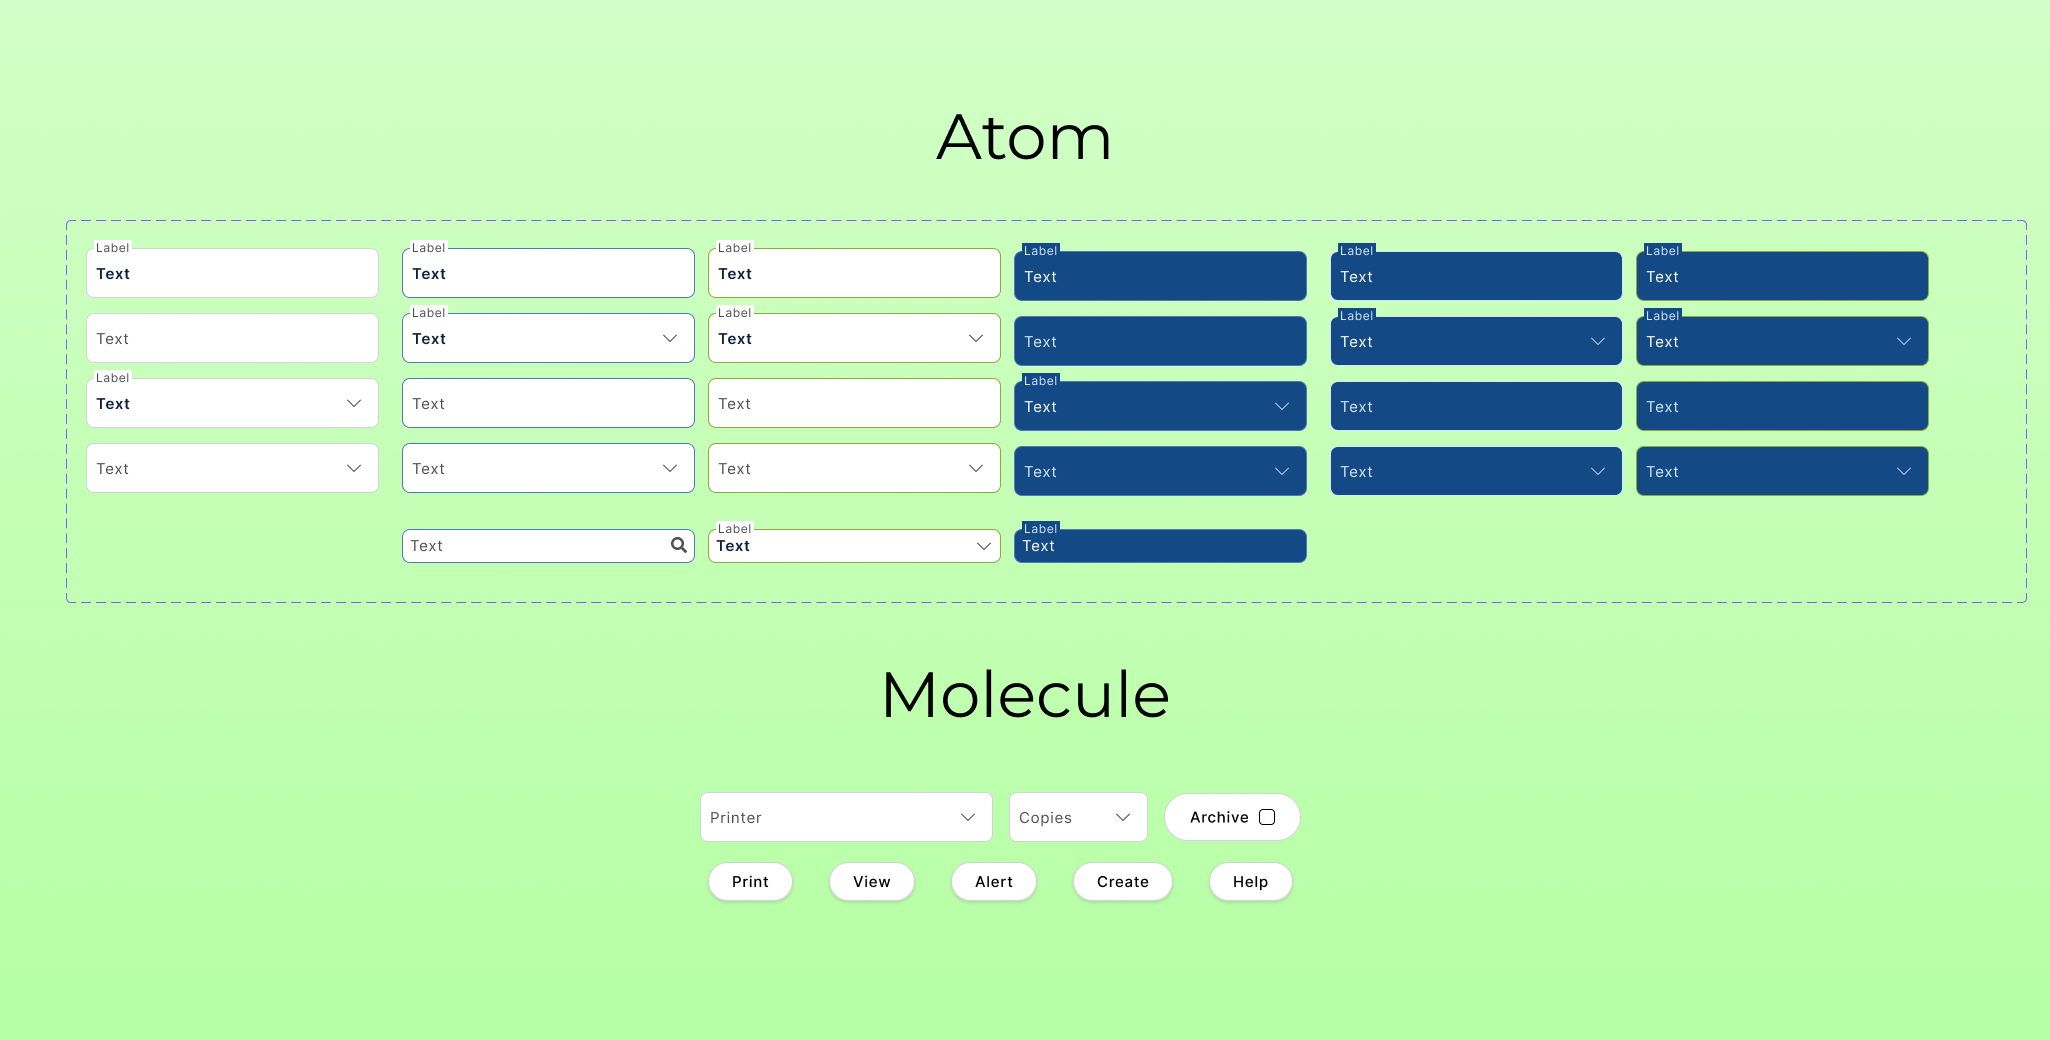 Components and Molecules from the design system.